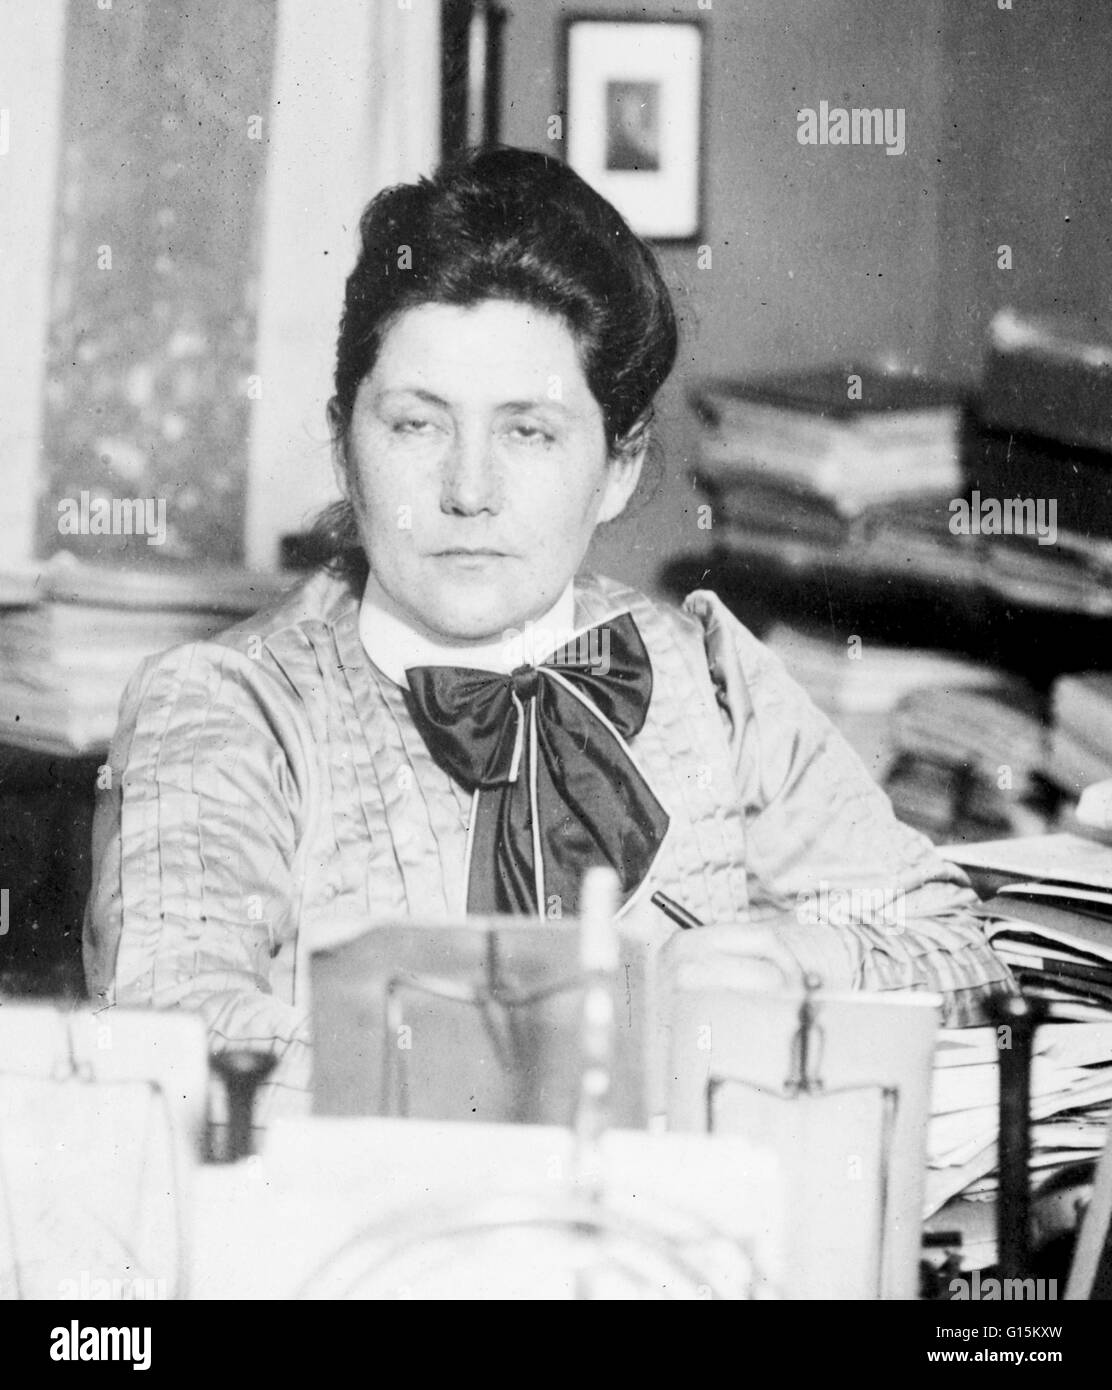 Lydia Rabinowitsch-Kempner (August 22, 1871 - August 3, 1935) was an Russian-American physician. She was educated privately in Latin and Greek, and studied natural sciences at the universities of Zurich and Bern (MD). After graduation she went to Berlin, Stock Photo